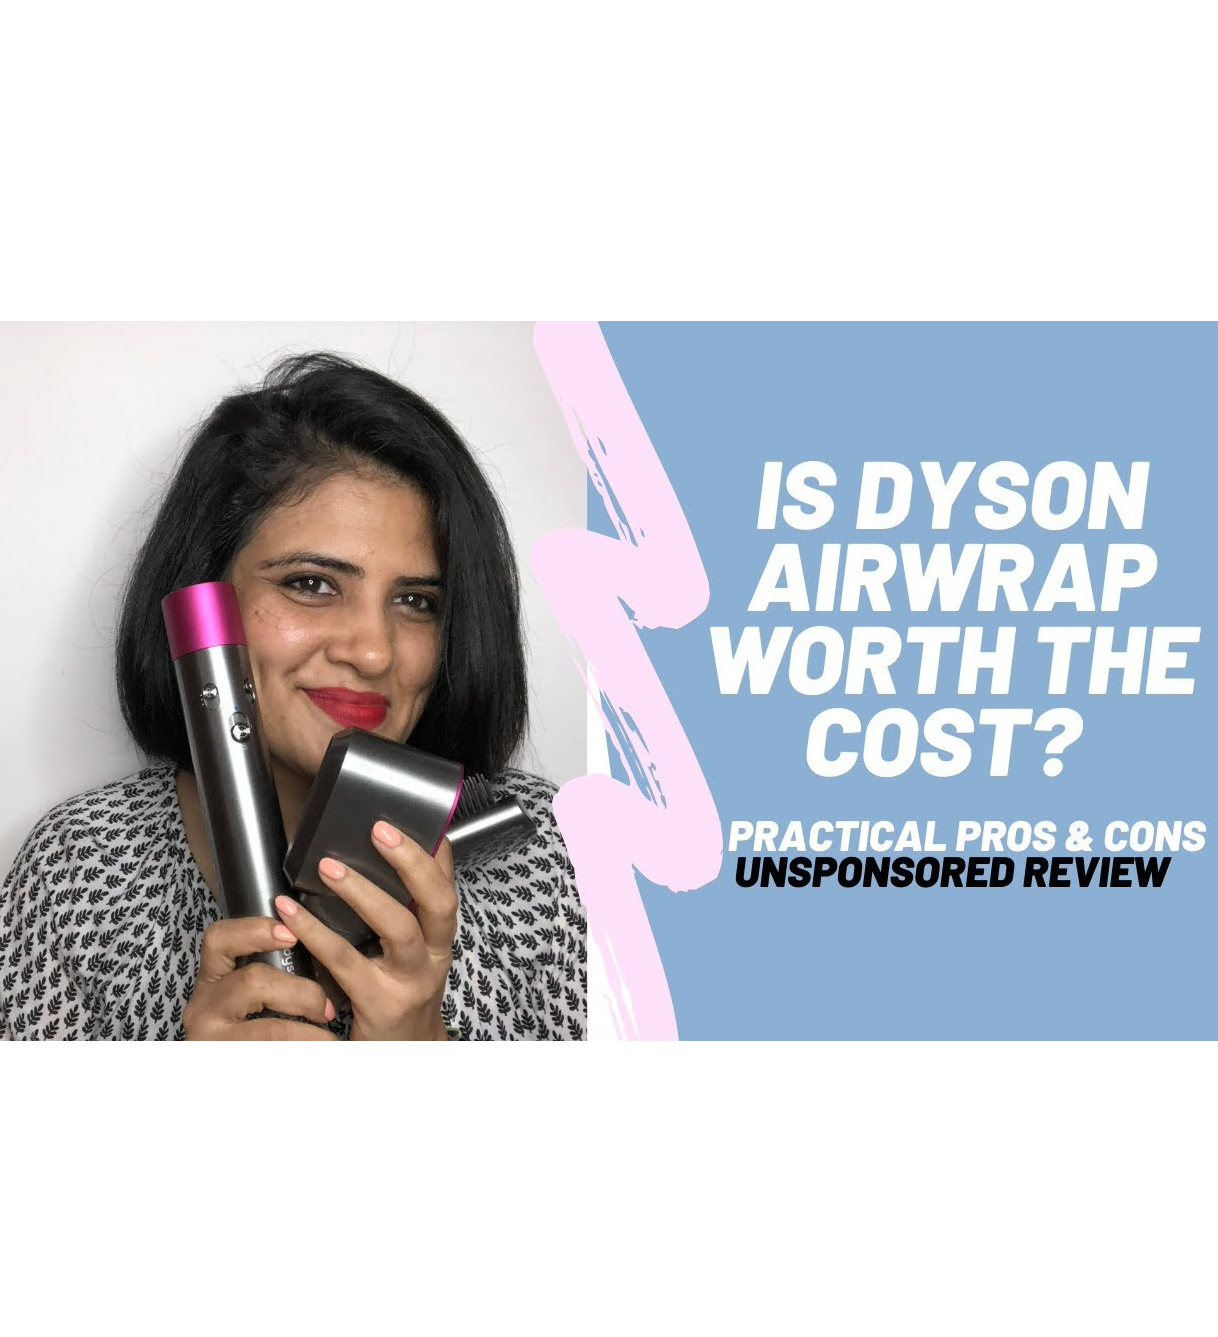 Is DYSON AIRWRAP worth the cost? I DYSON AIRWRAP unsponsored review